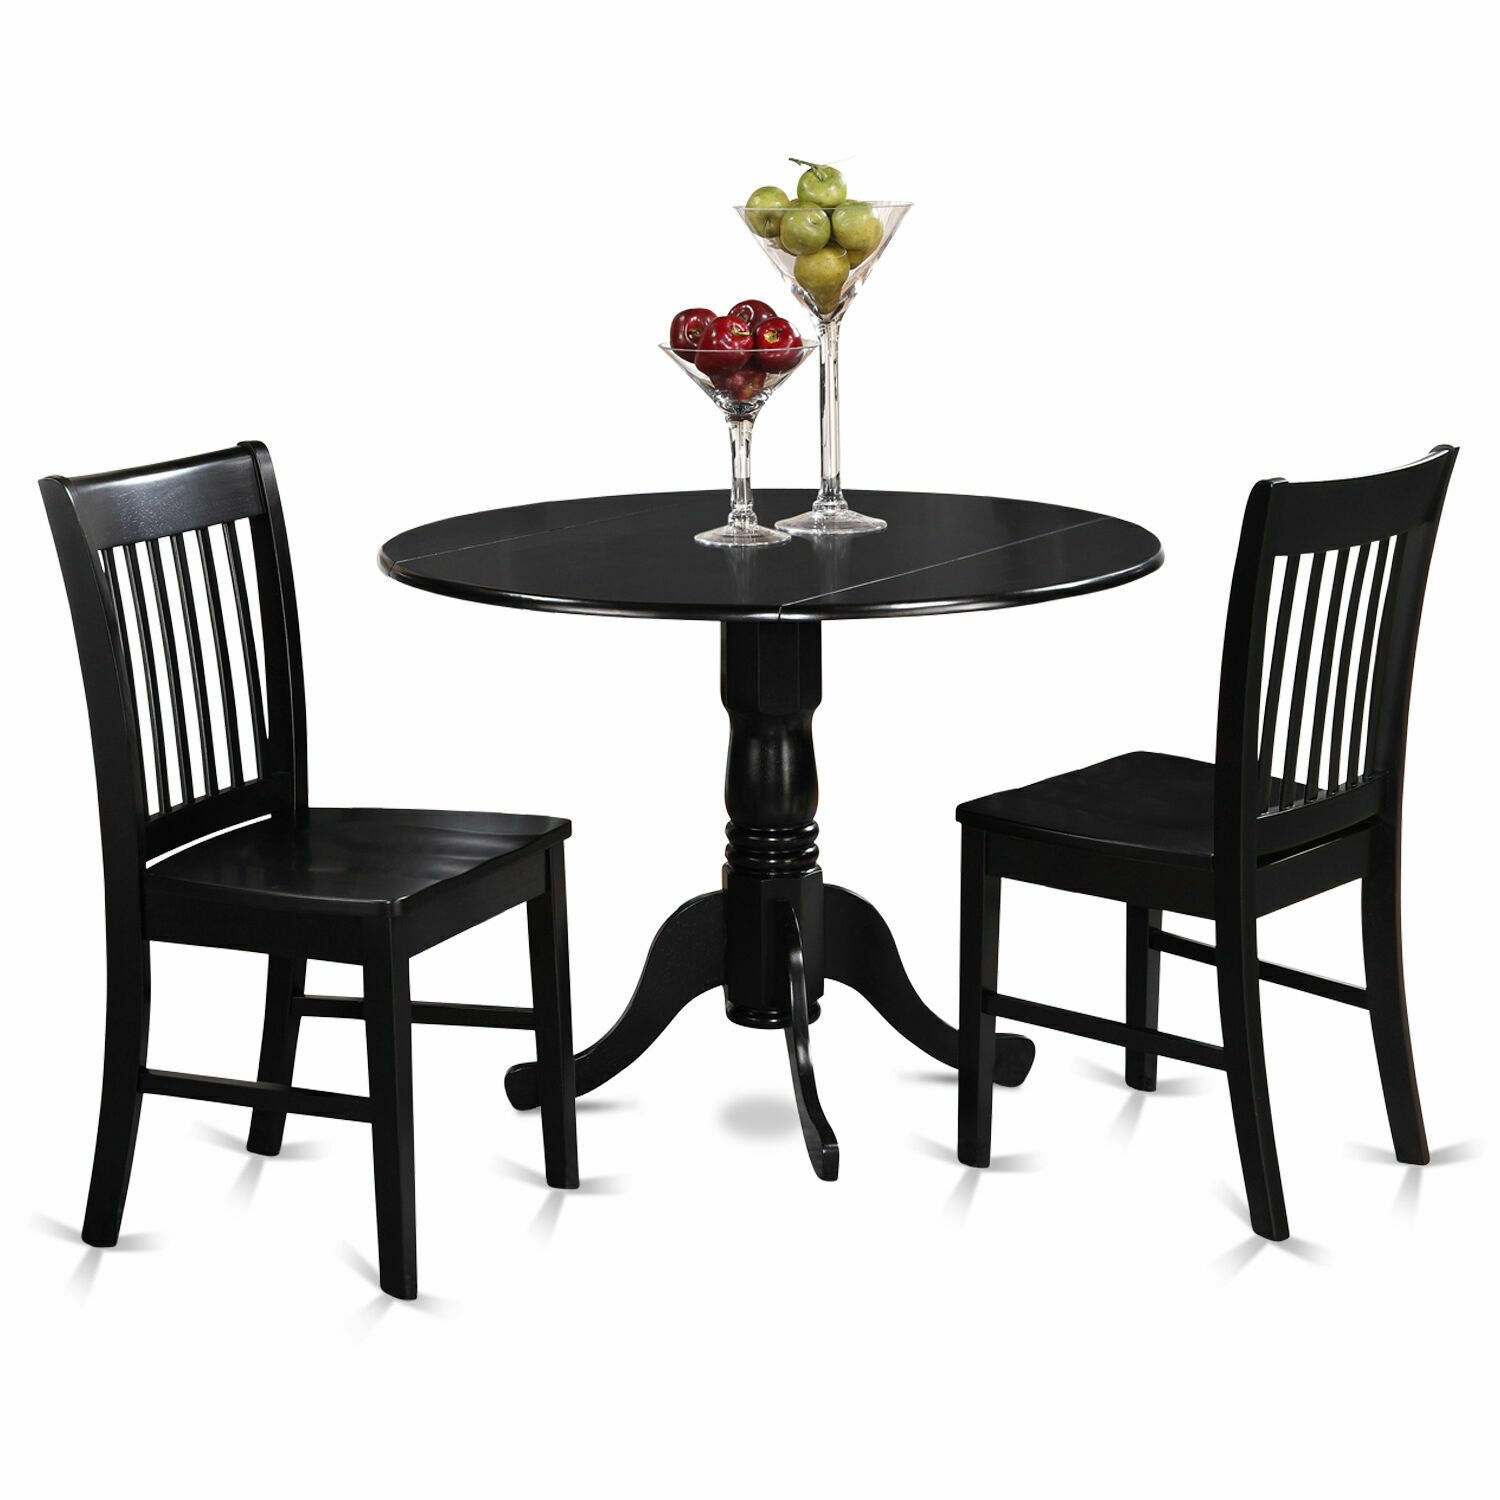 Dublin Black 3 Piece 42" Drop Leaf Dining Table Set with Wooden Seat Chairs